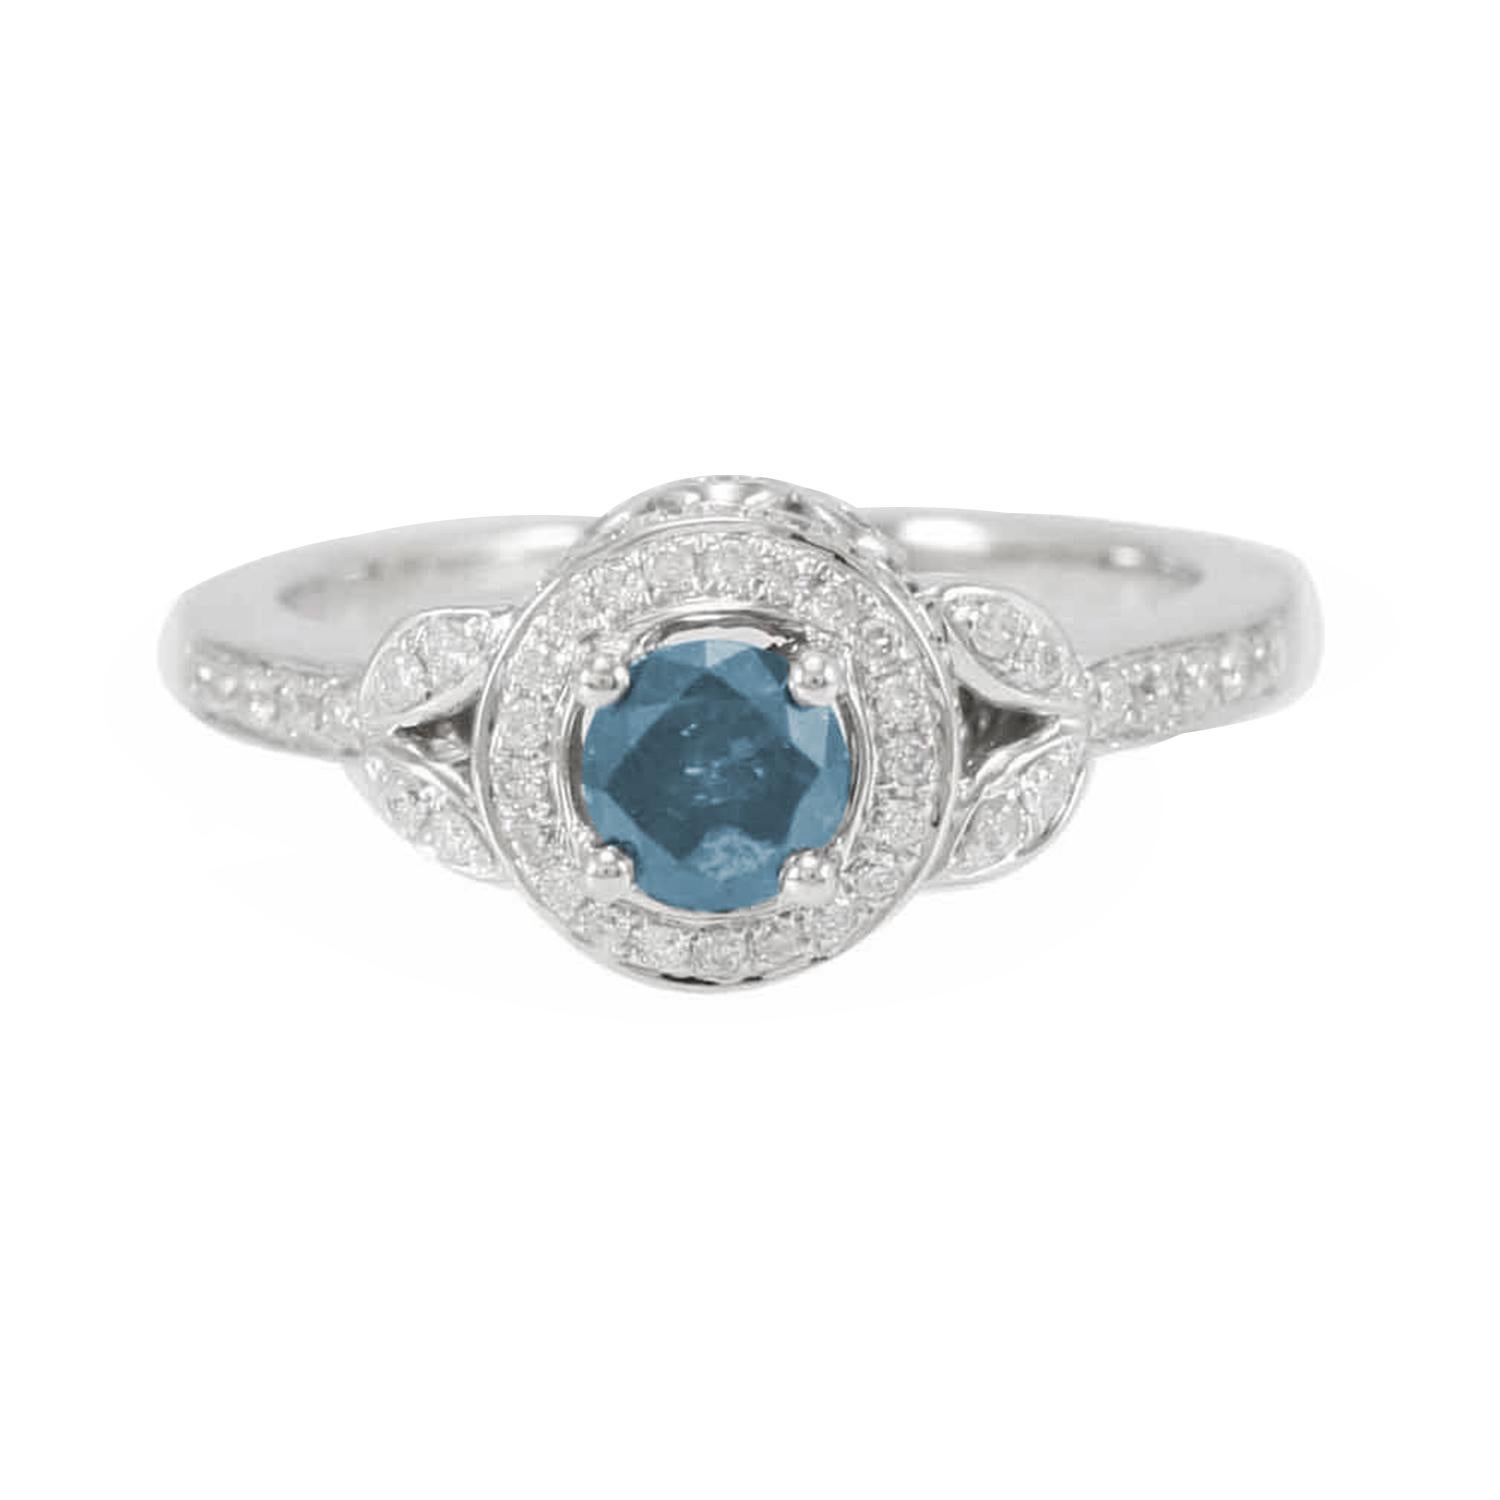 This stunning ring from the Suzy Levian Limited Edition collection features a gorgeous round-cut, fancy blue diamond (.36ct) center stone with an array of white diamond (.41cttw) accents, handset in a 14k white gold setting. French filigree